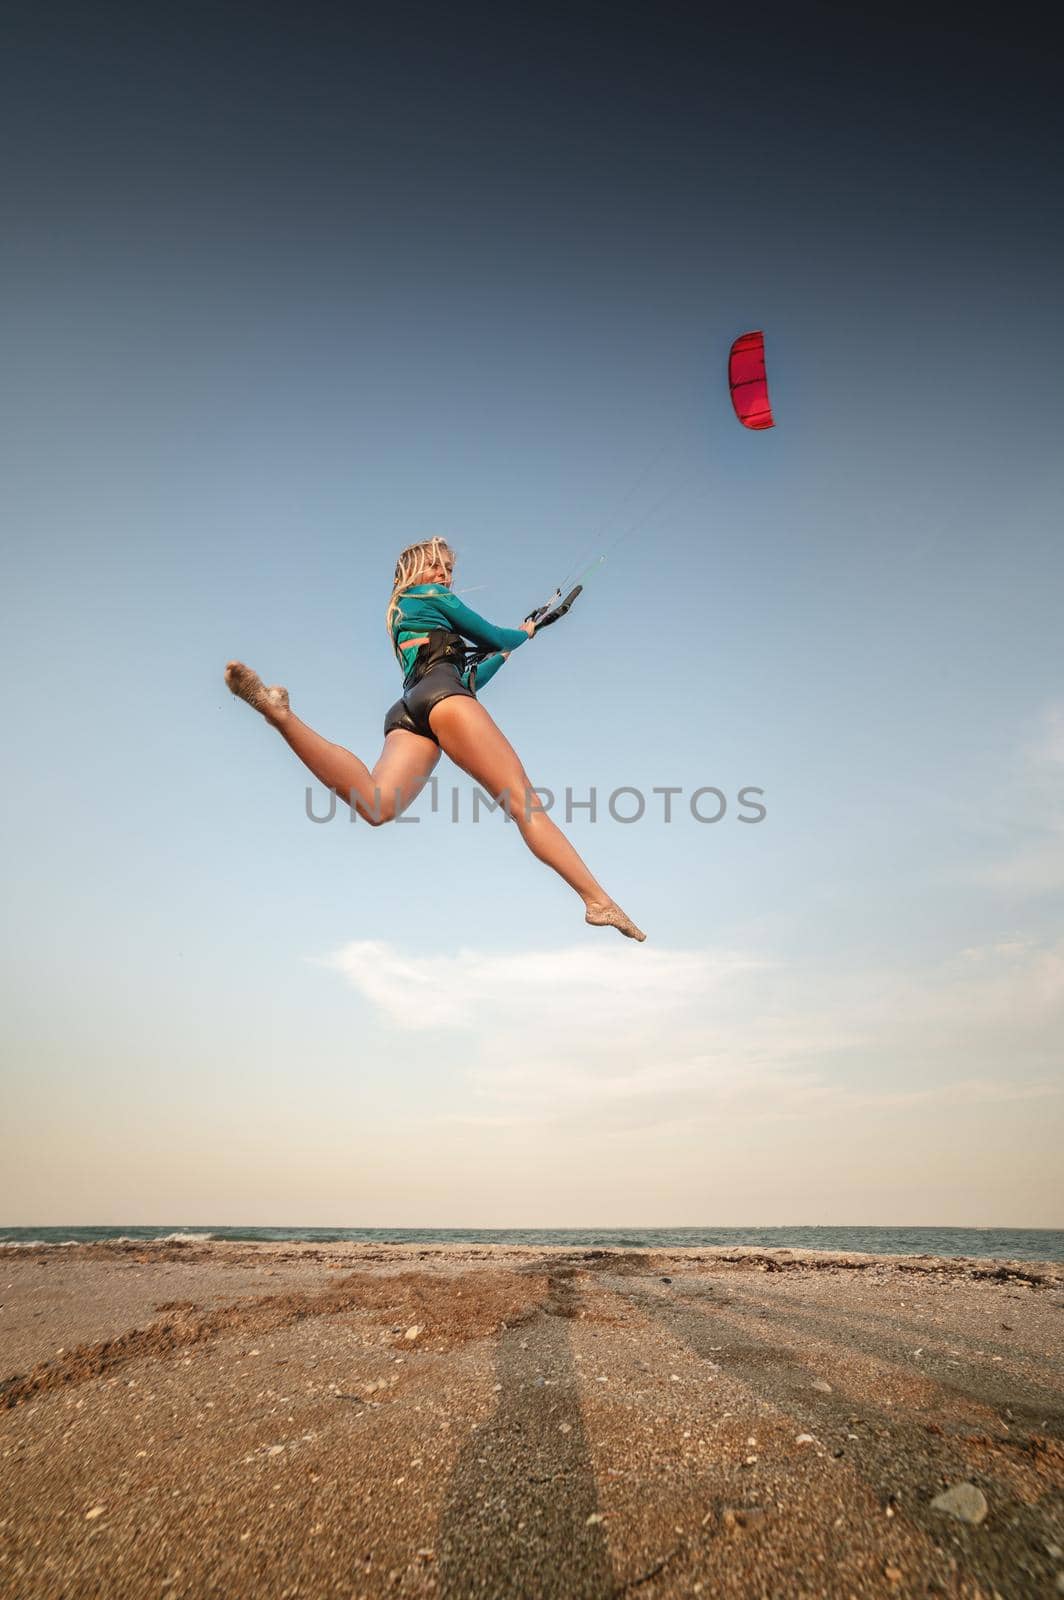 Sportswoman kitesurfer jumps with her kite on the beach. Free flight over land with a kite.